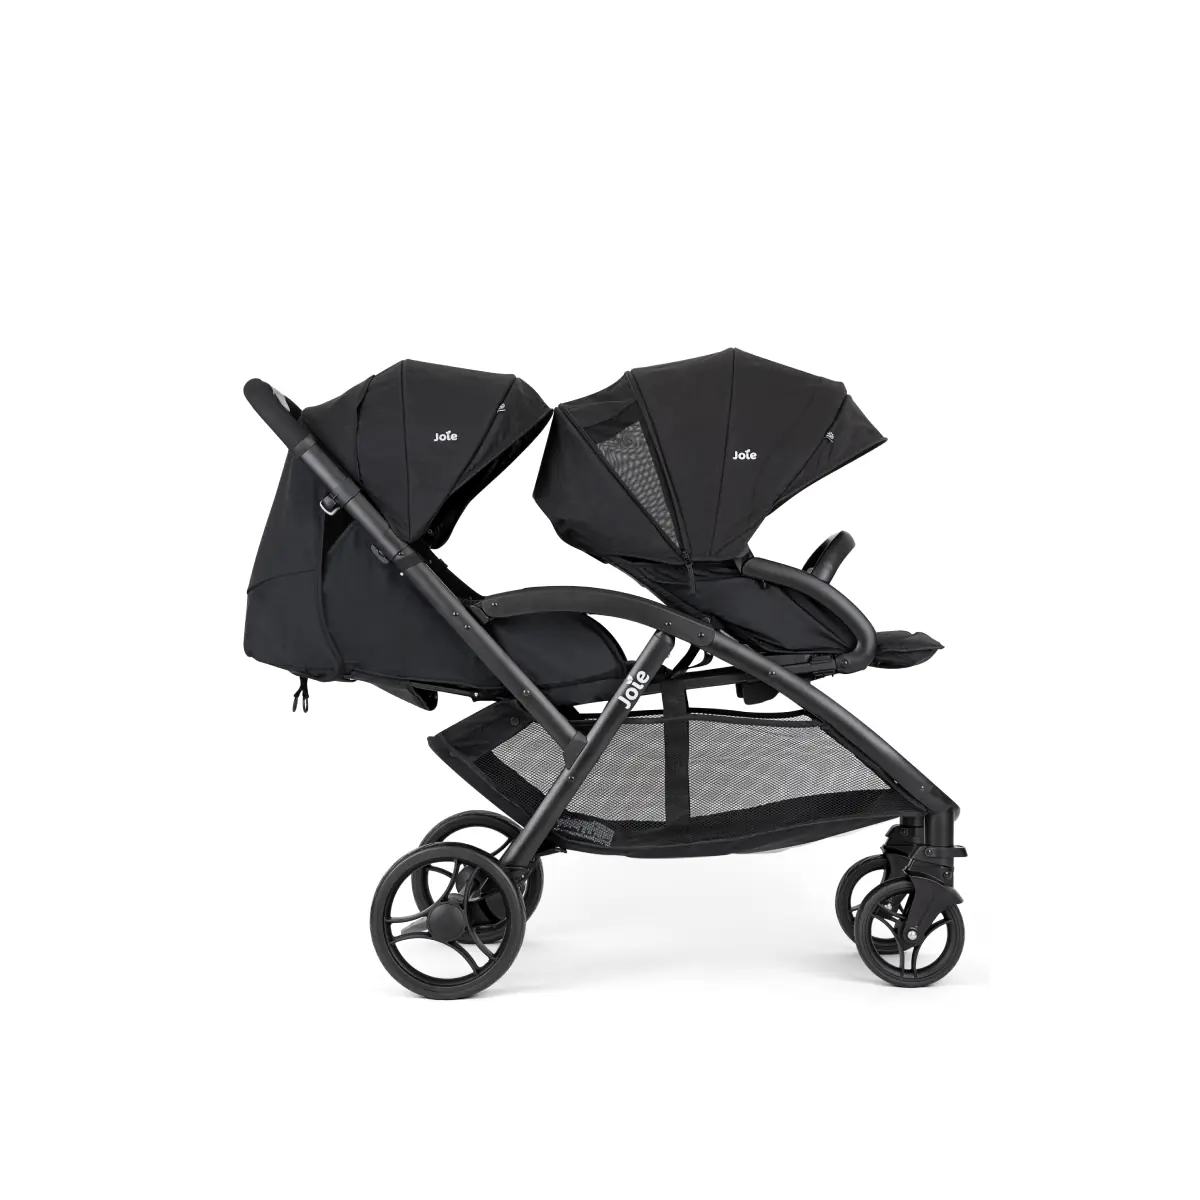 Joie Evalite Duo buggy - Twins & tandems - Pushchairs